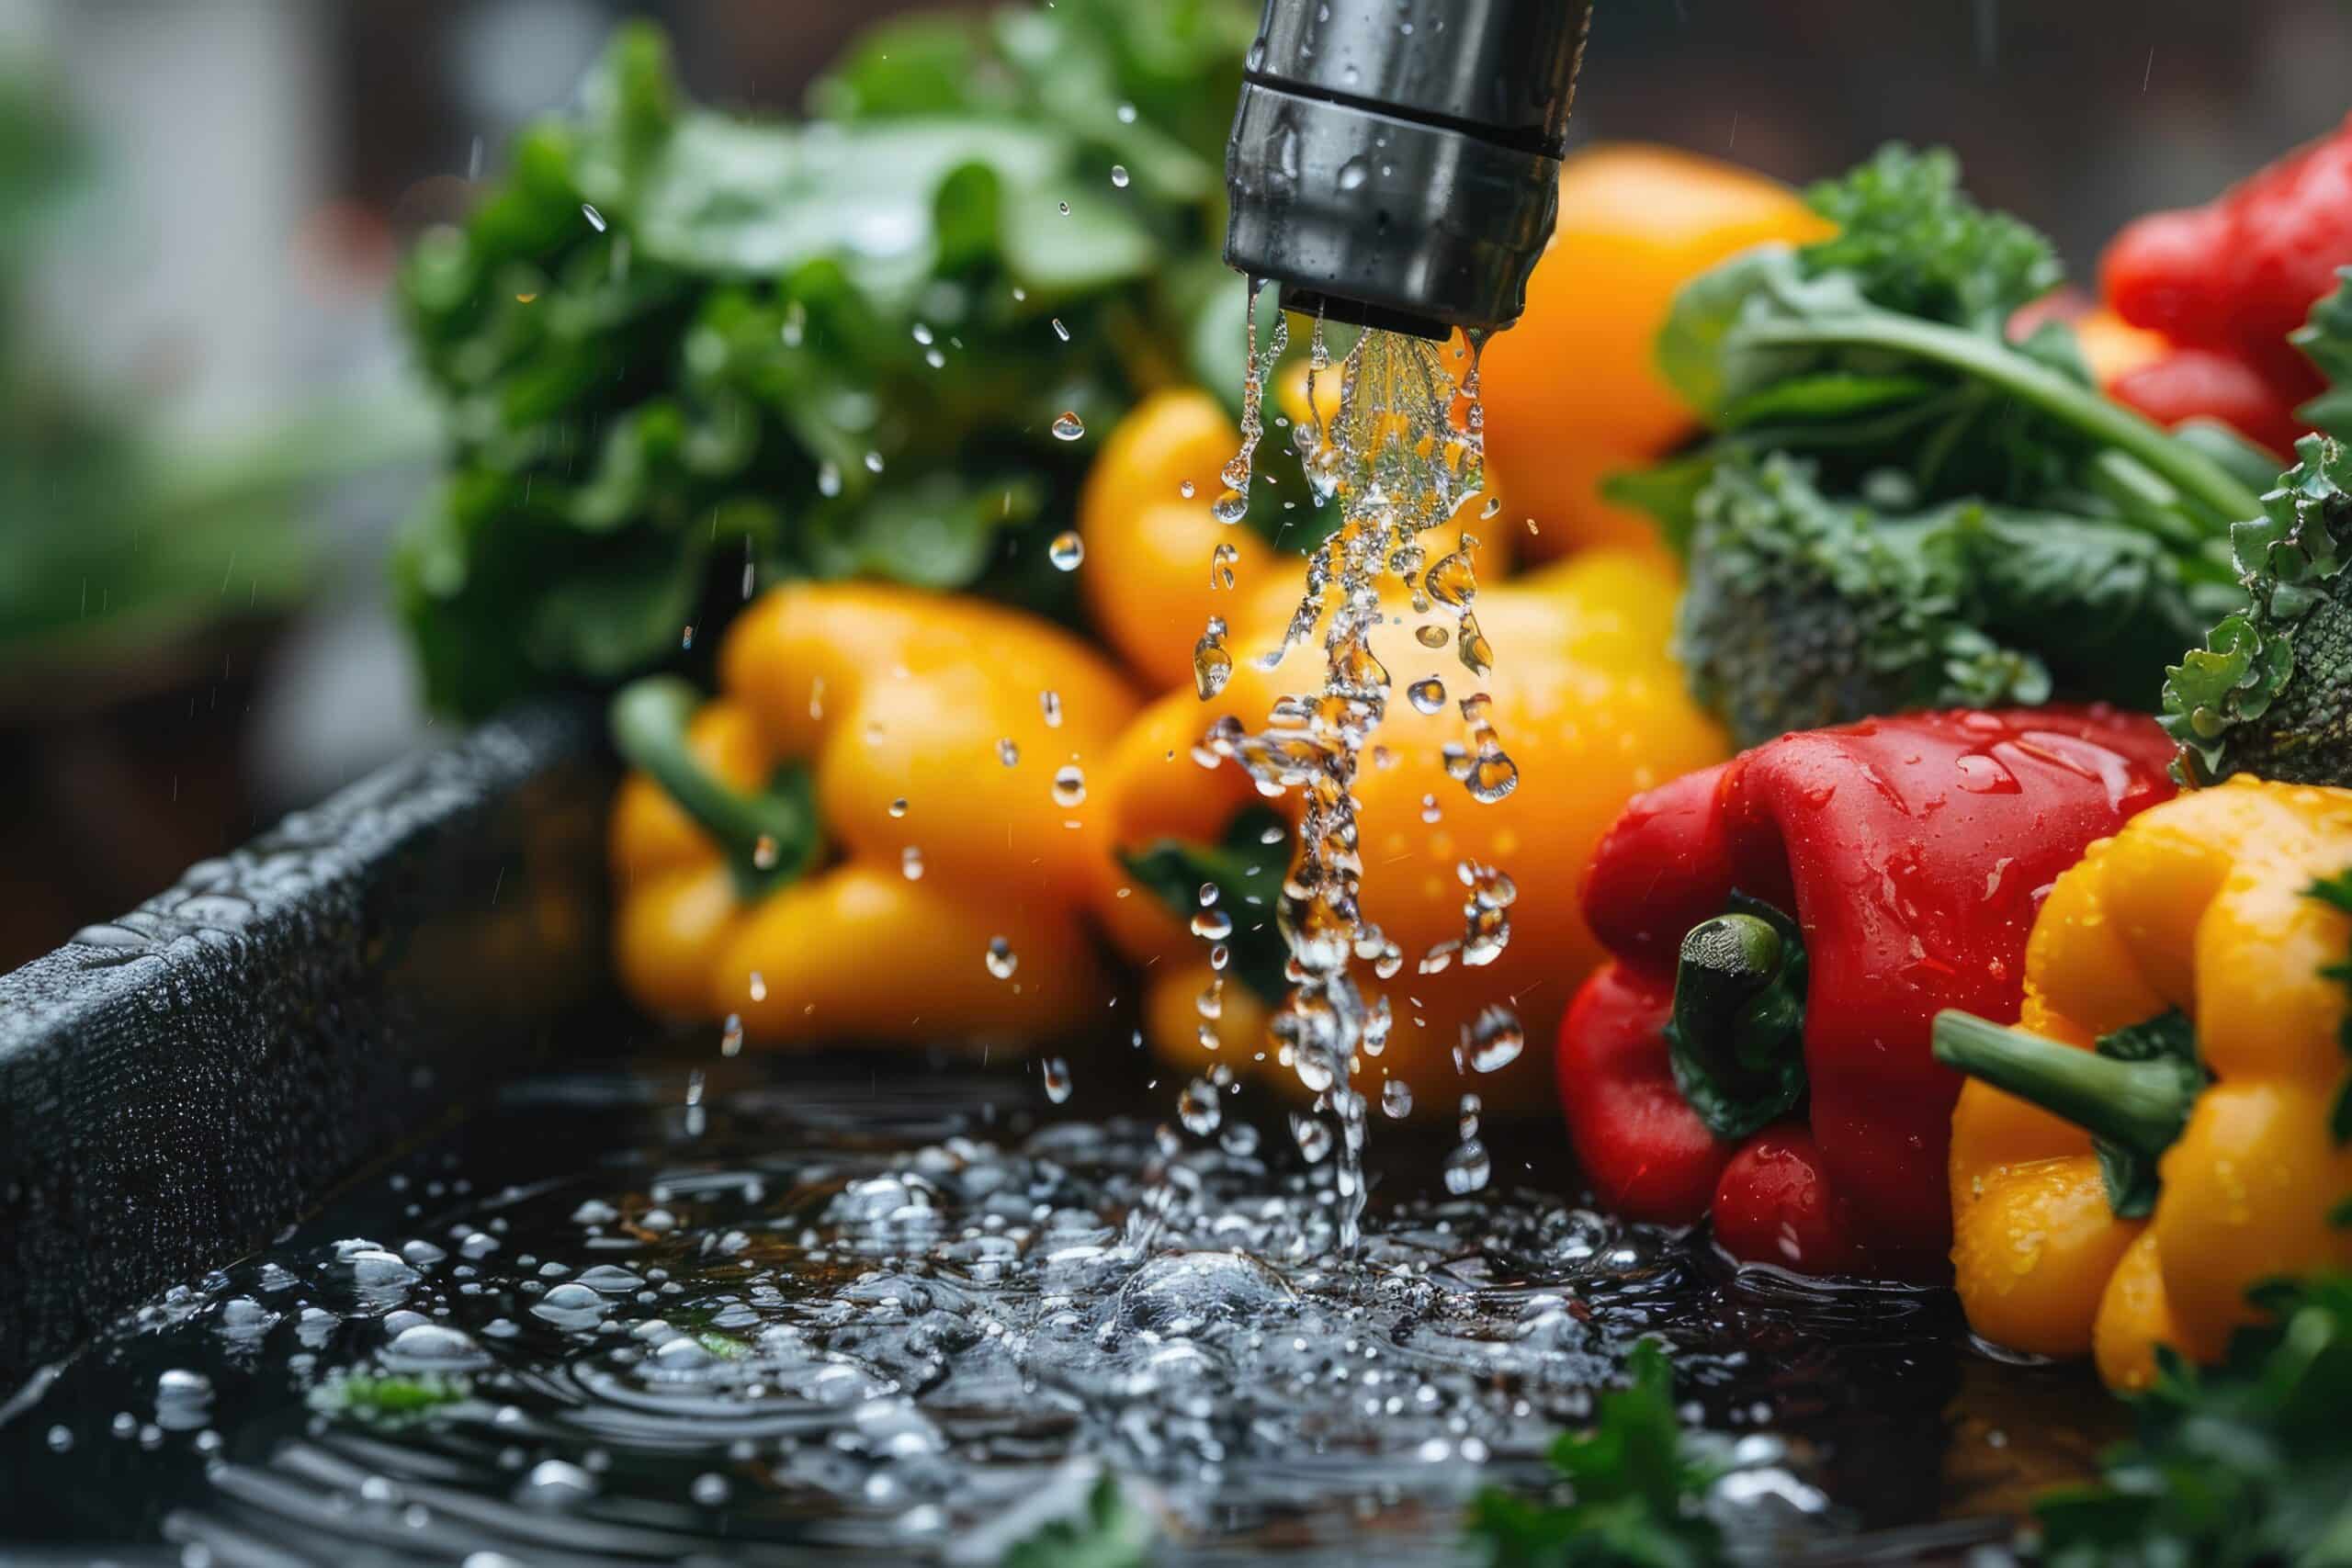 growmyownhealthfood.com : What vegetables don't need a lot of water?